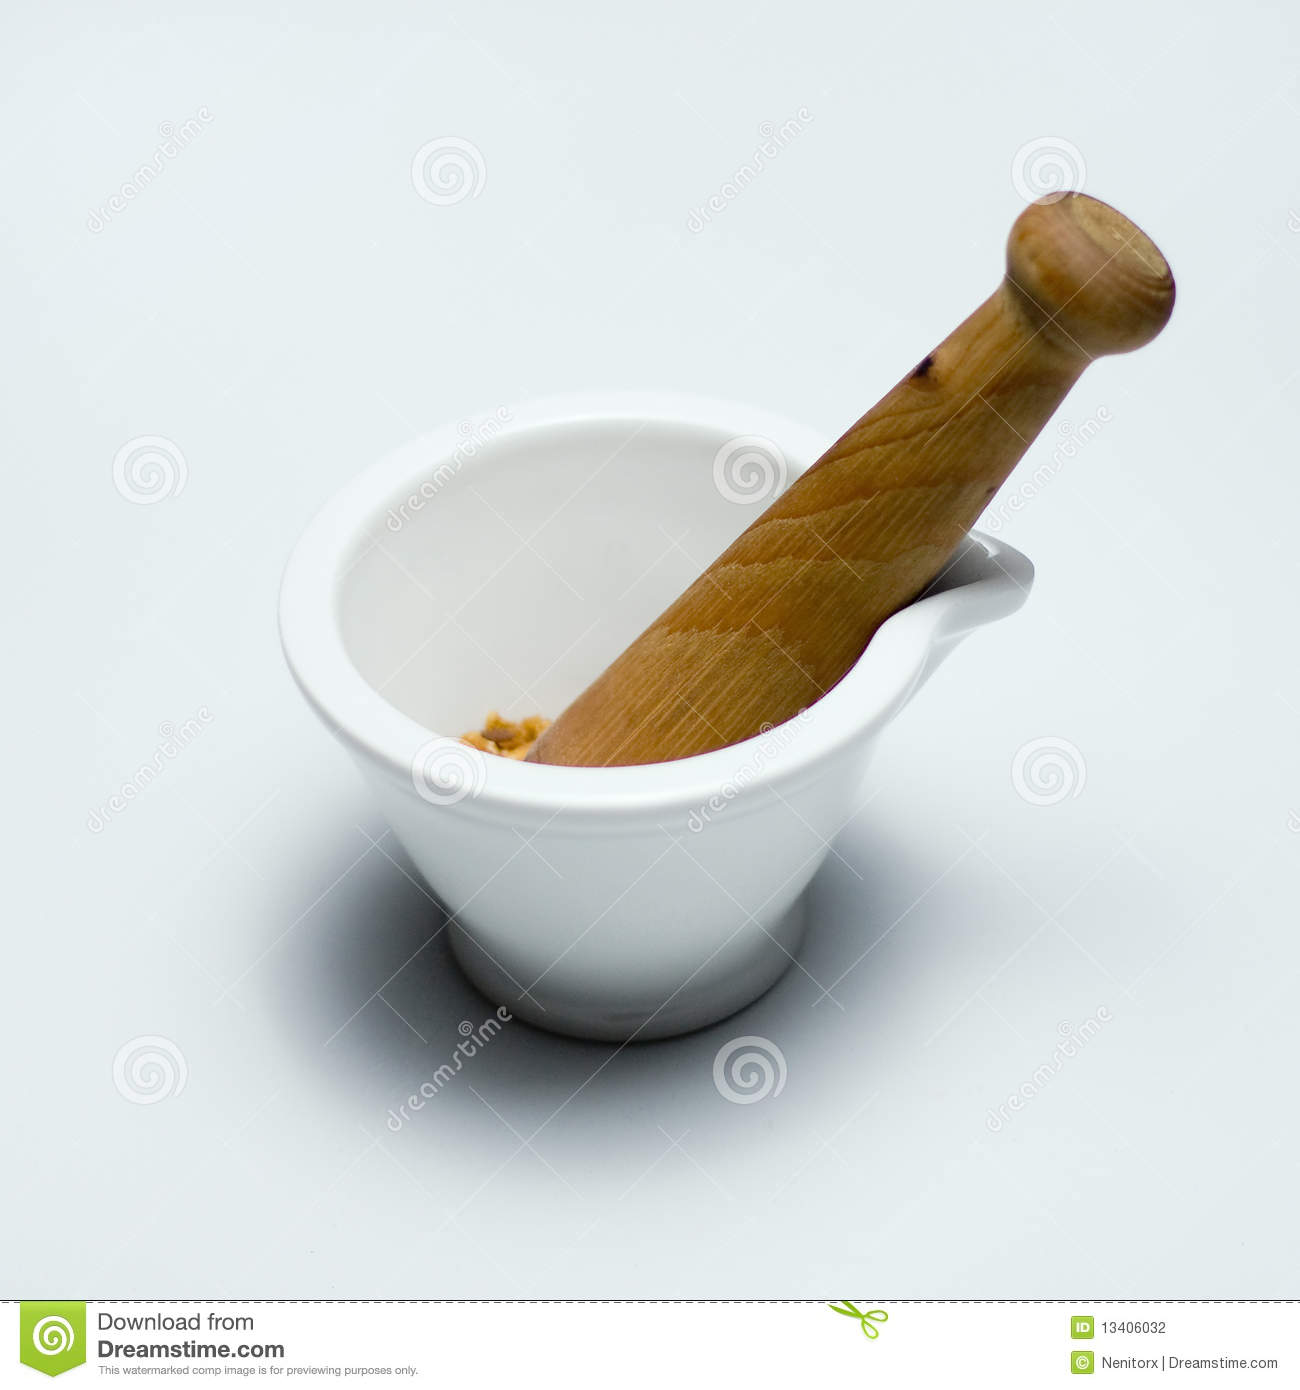 Spice Mortar Stock Photography   Image  13406032